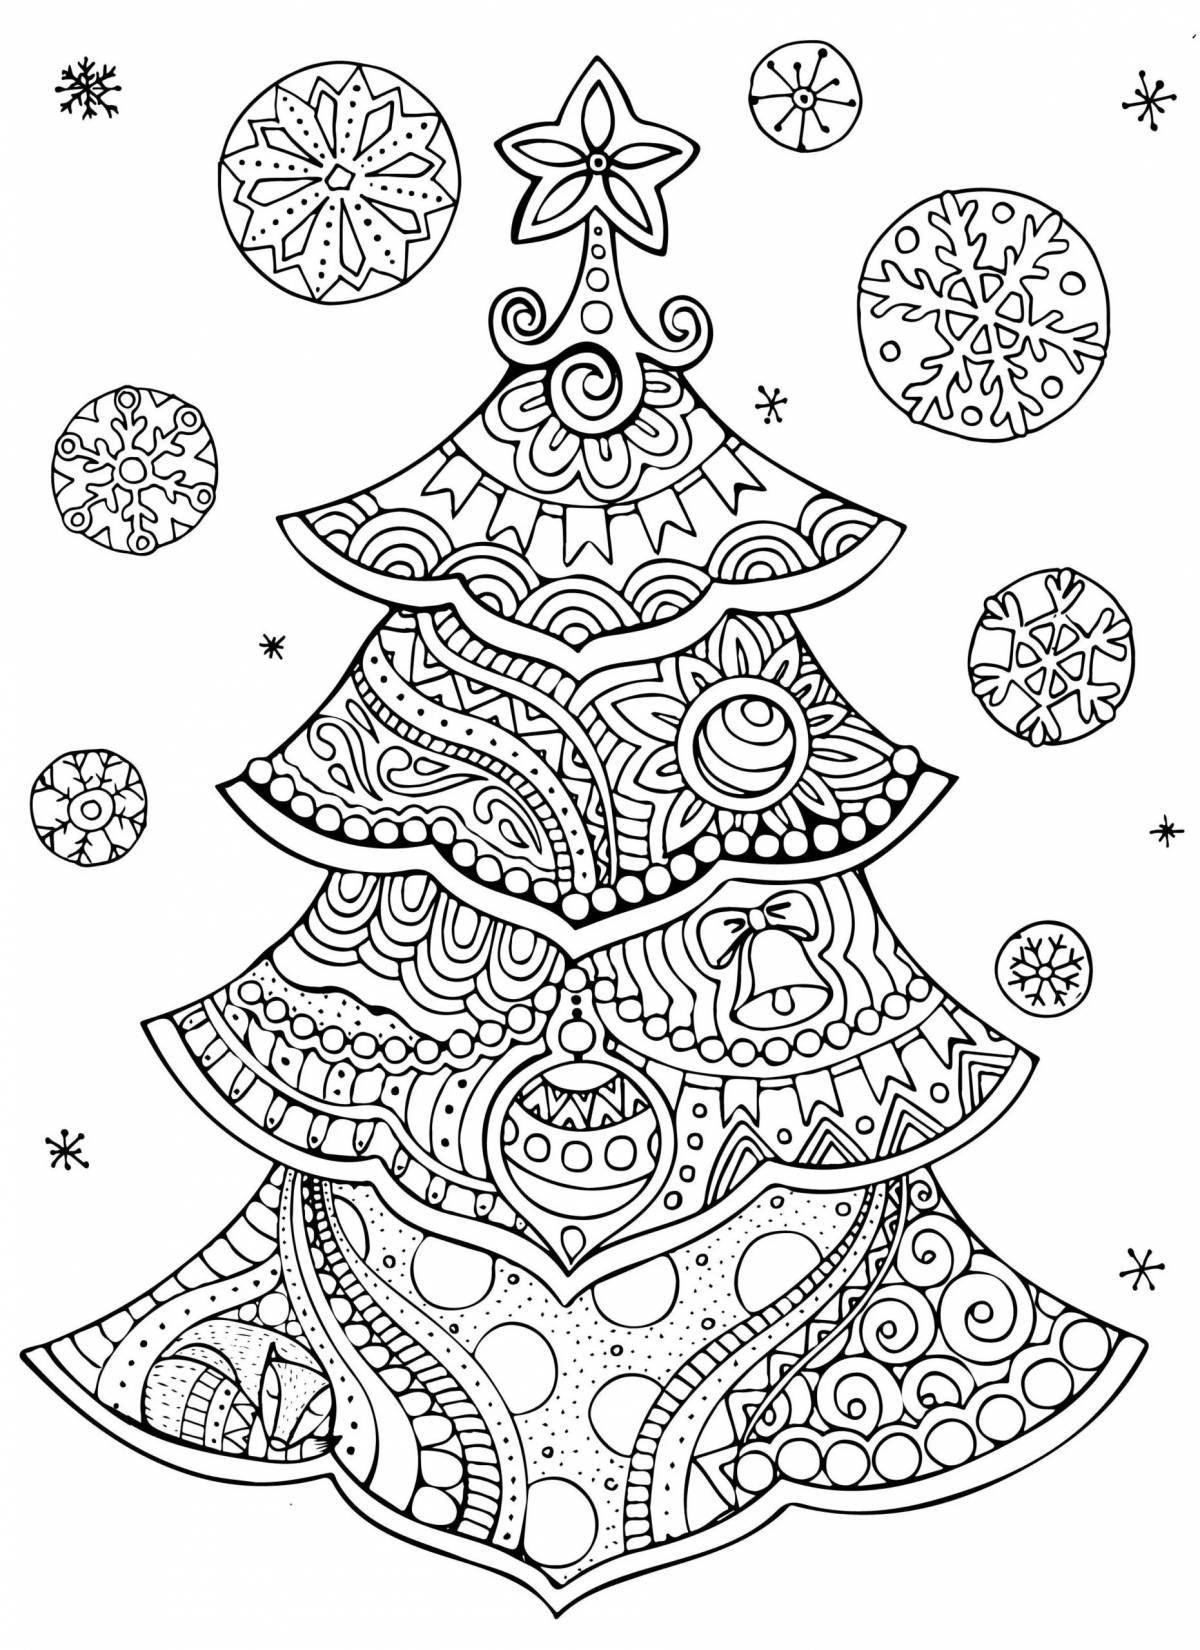 Amazing big tree coloring book for kids